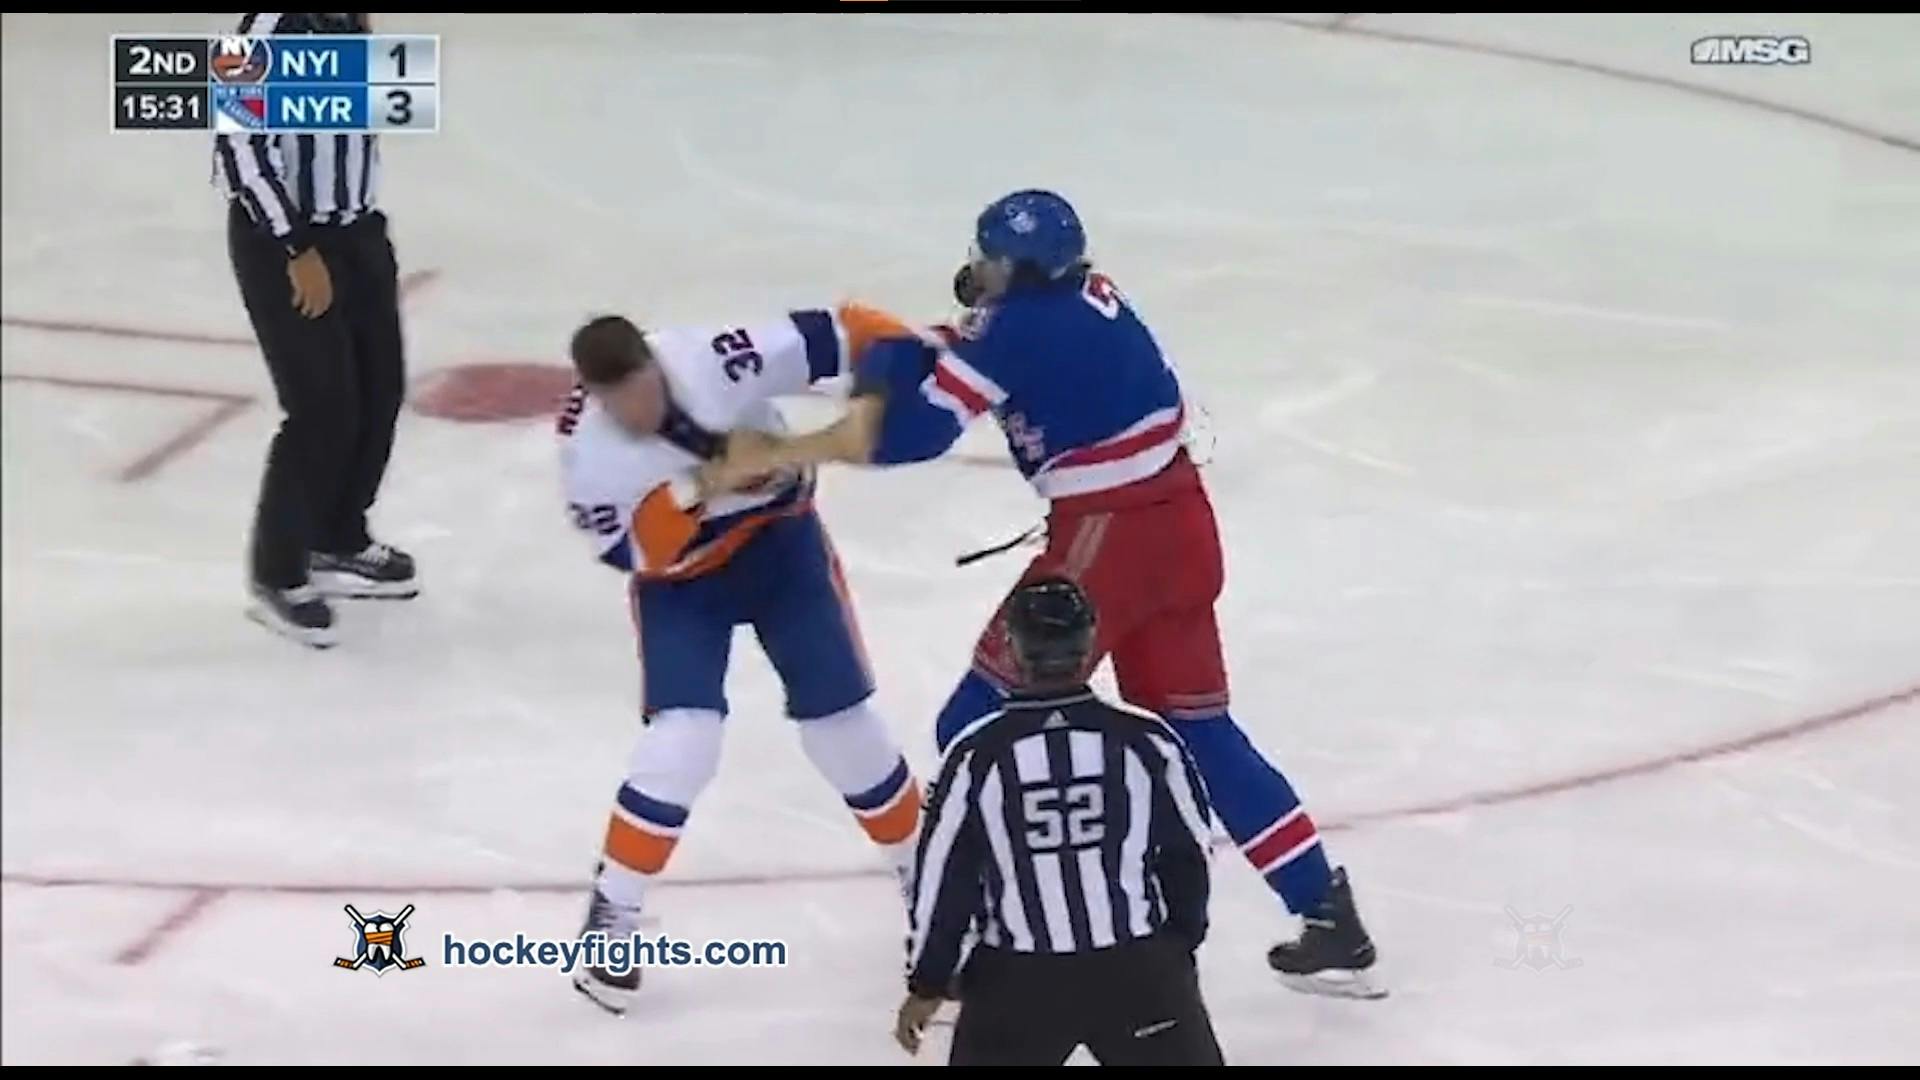 Rangers-Devils: 3 fights on opening faceoff 3/19/12 